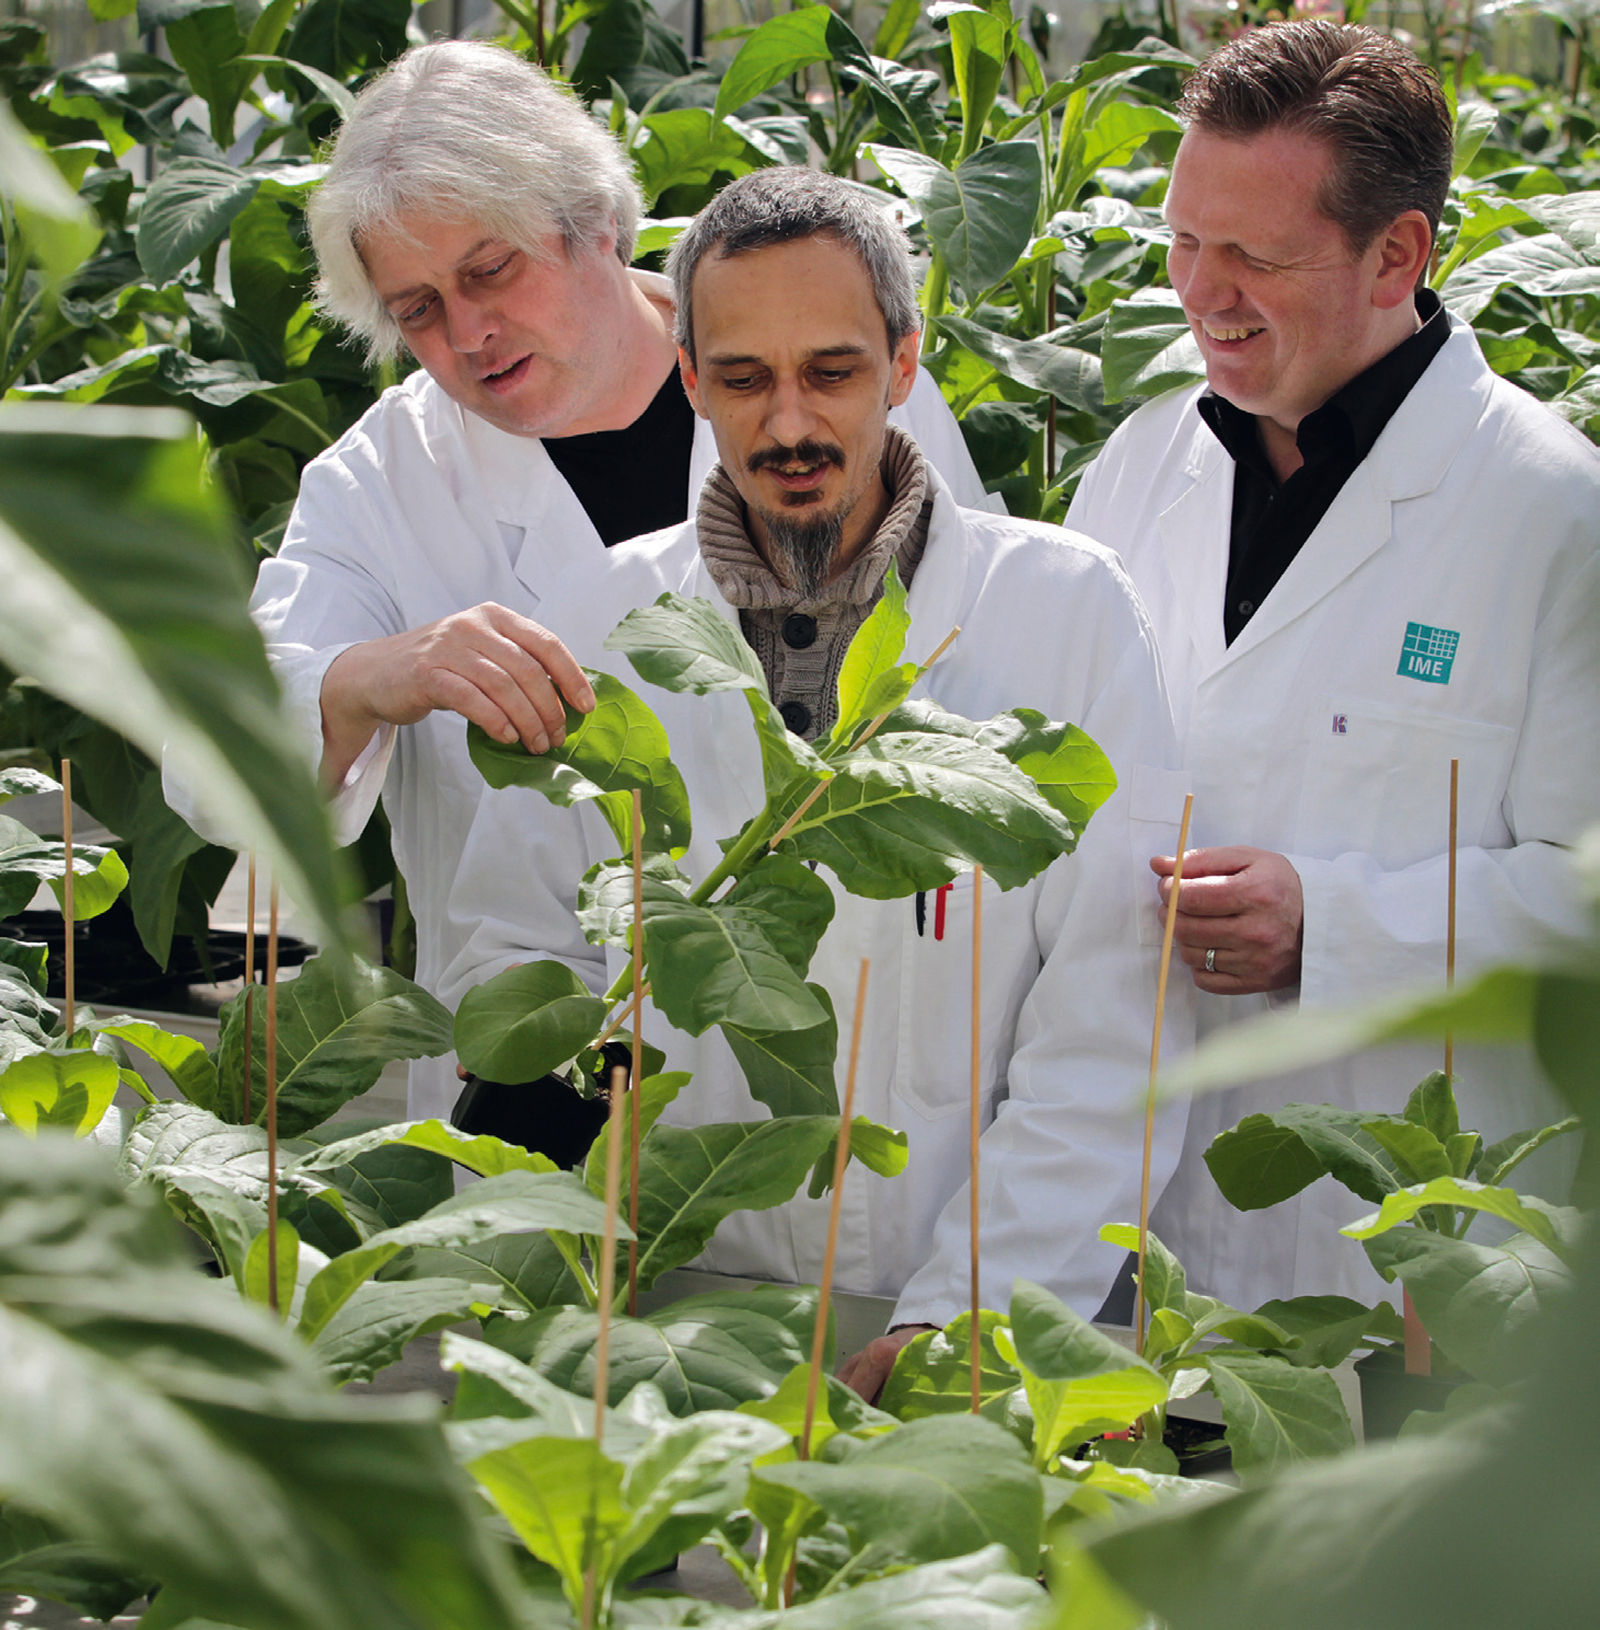 Image: Dr. Jürgen Drossard, Dr. Thomas Rademacher and Dr. Stefan Schillberg (from left to right)